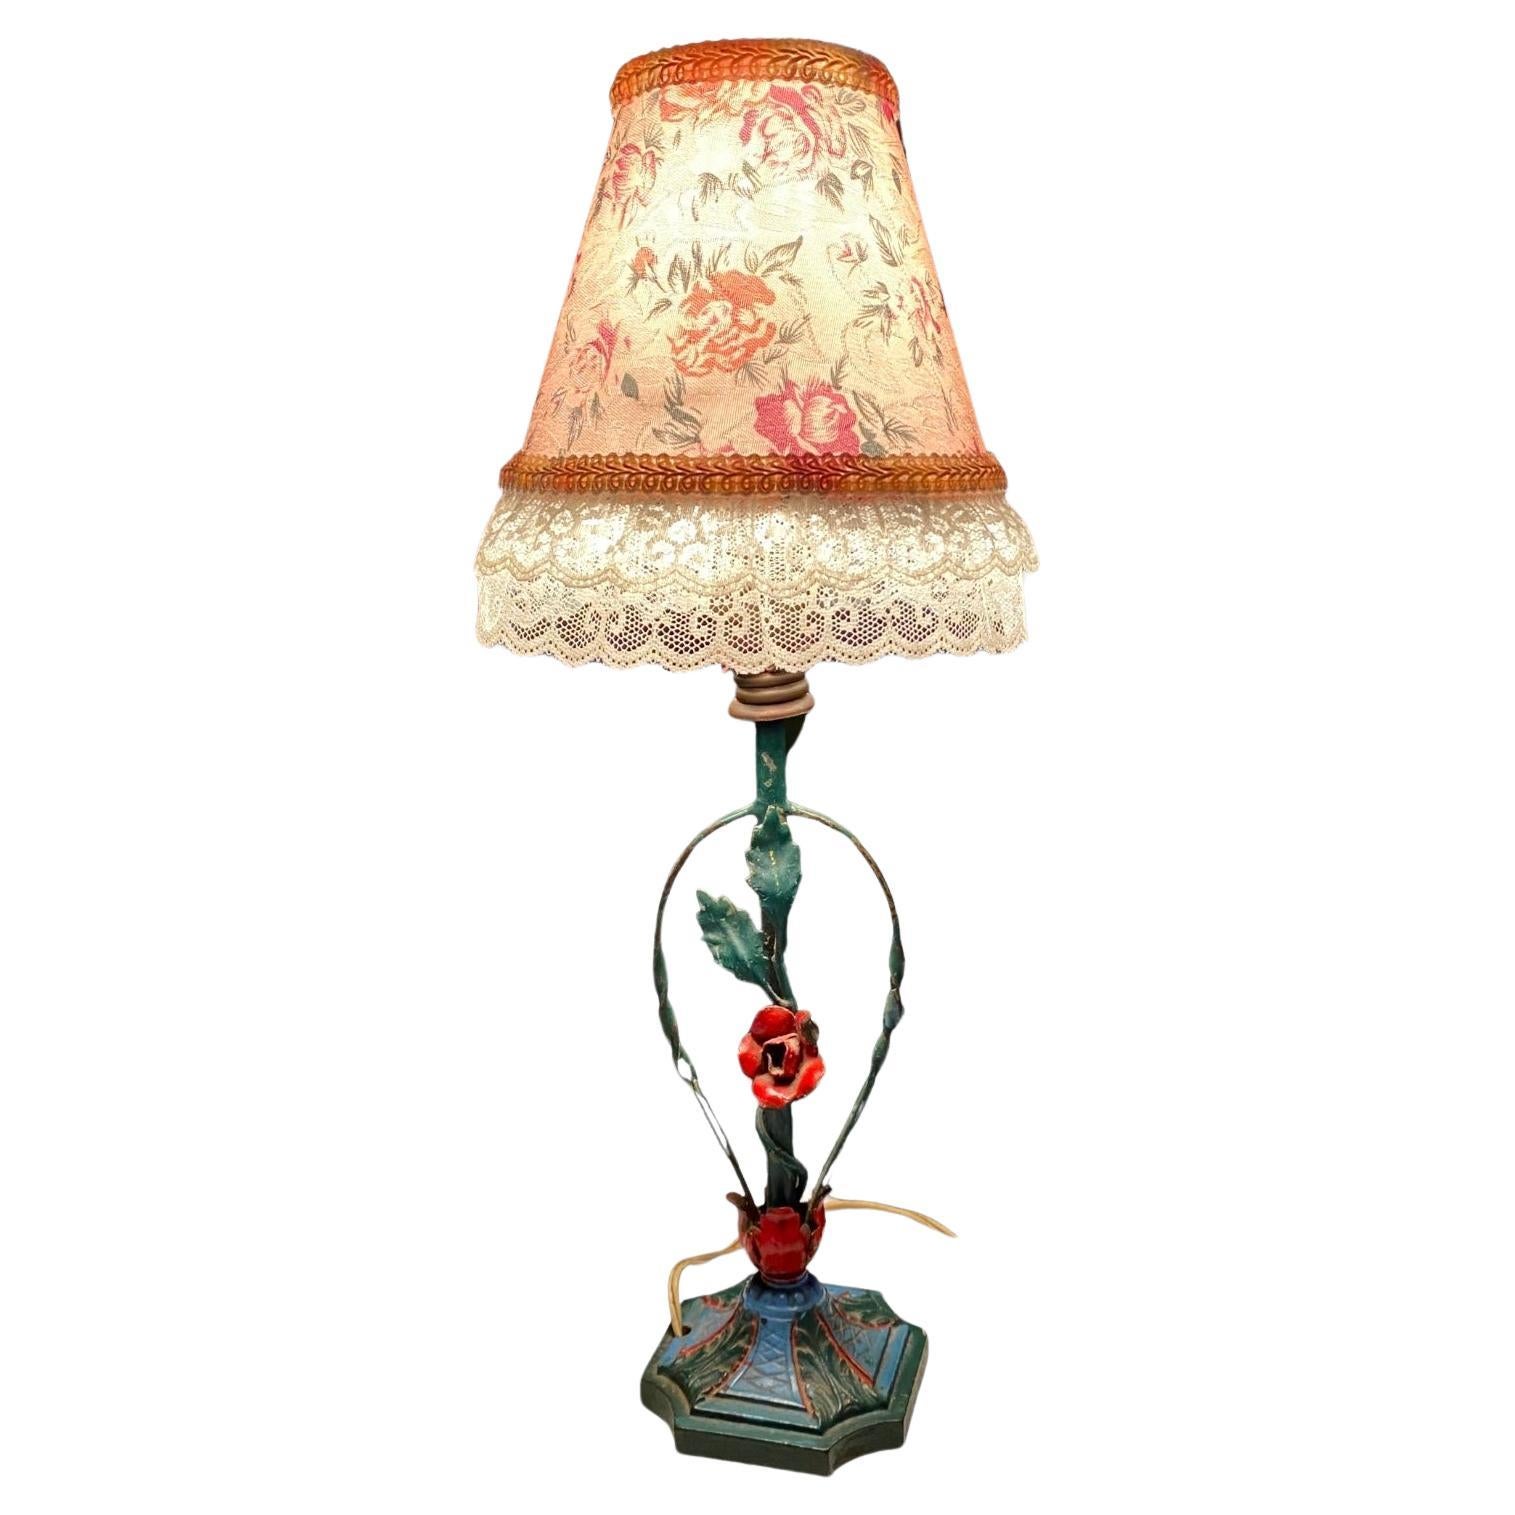 1940’s Rose Tole Lamp with Lace Trimmed Floral Shade